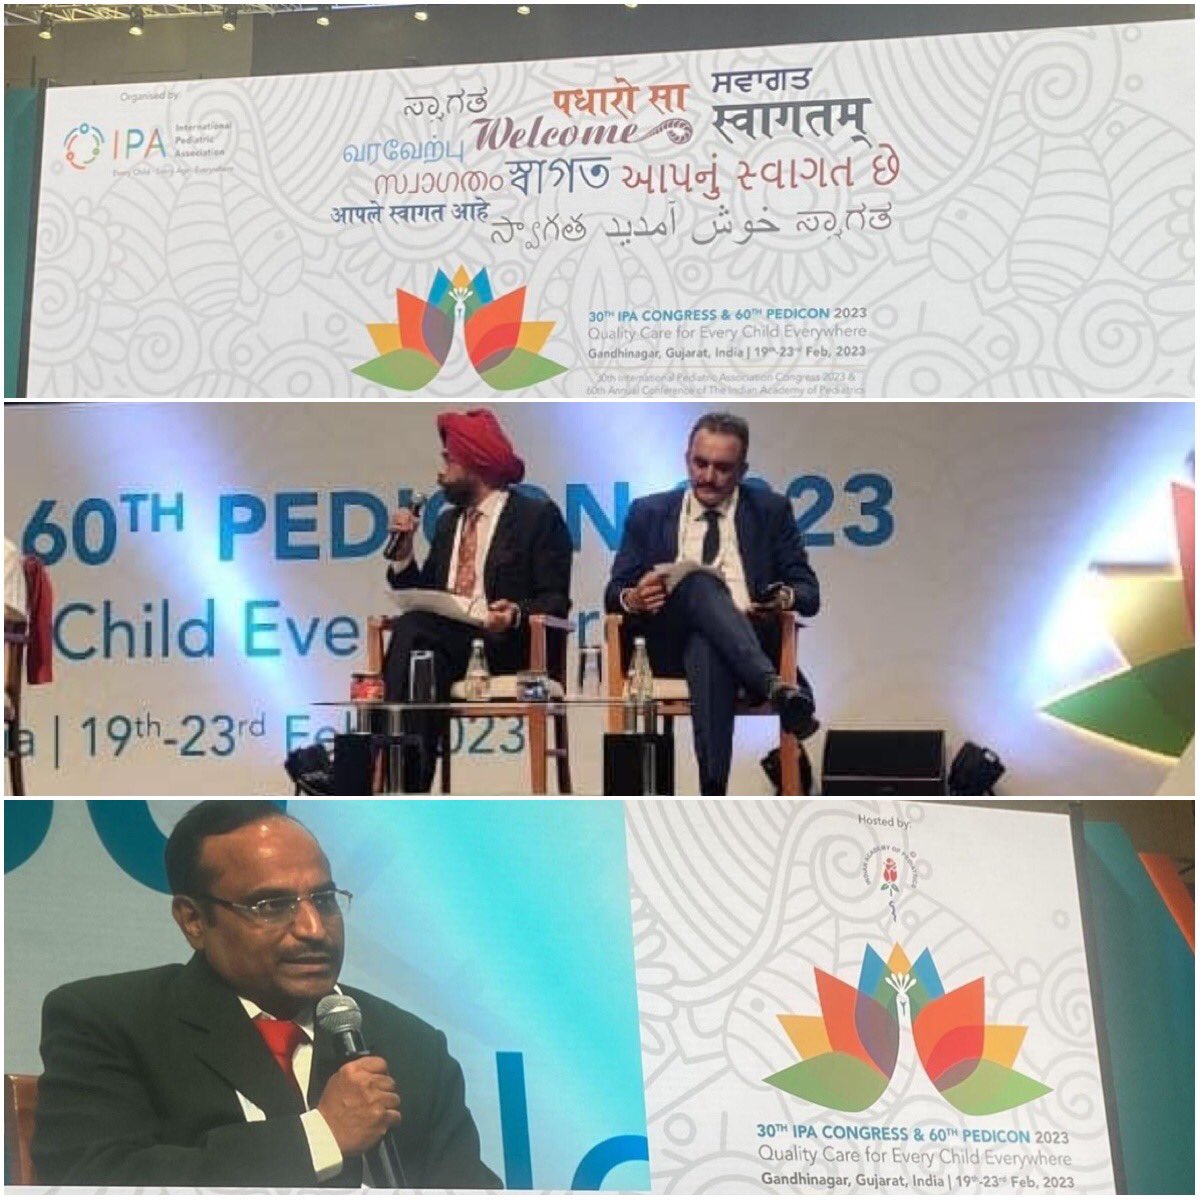 Dr. @DheeShah (former Editor-in-Chief @EditorIndPed) was a panellist in an important plenary session on #MeetTheEditors, moderated by Dr HPS Sachdev & @dr_soans, at the #IPACongress2023 #Pedicon2023 along with Dr. Nick Brown, EiC @ADC_BMJ & Dr. Esther Lau, EiC of
@LancetChildAdol